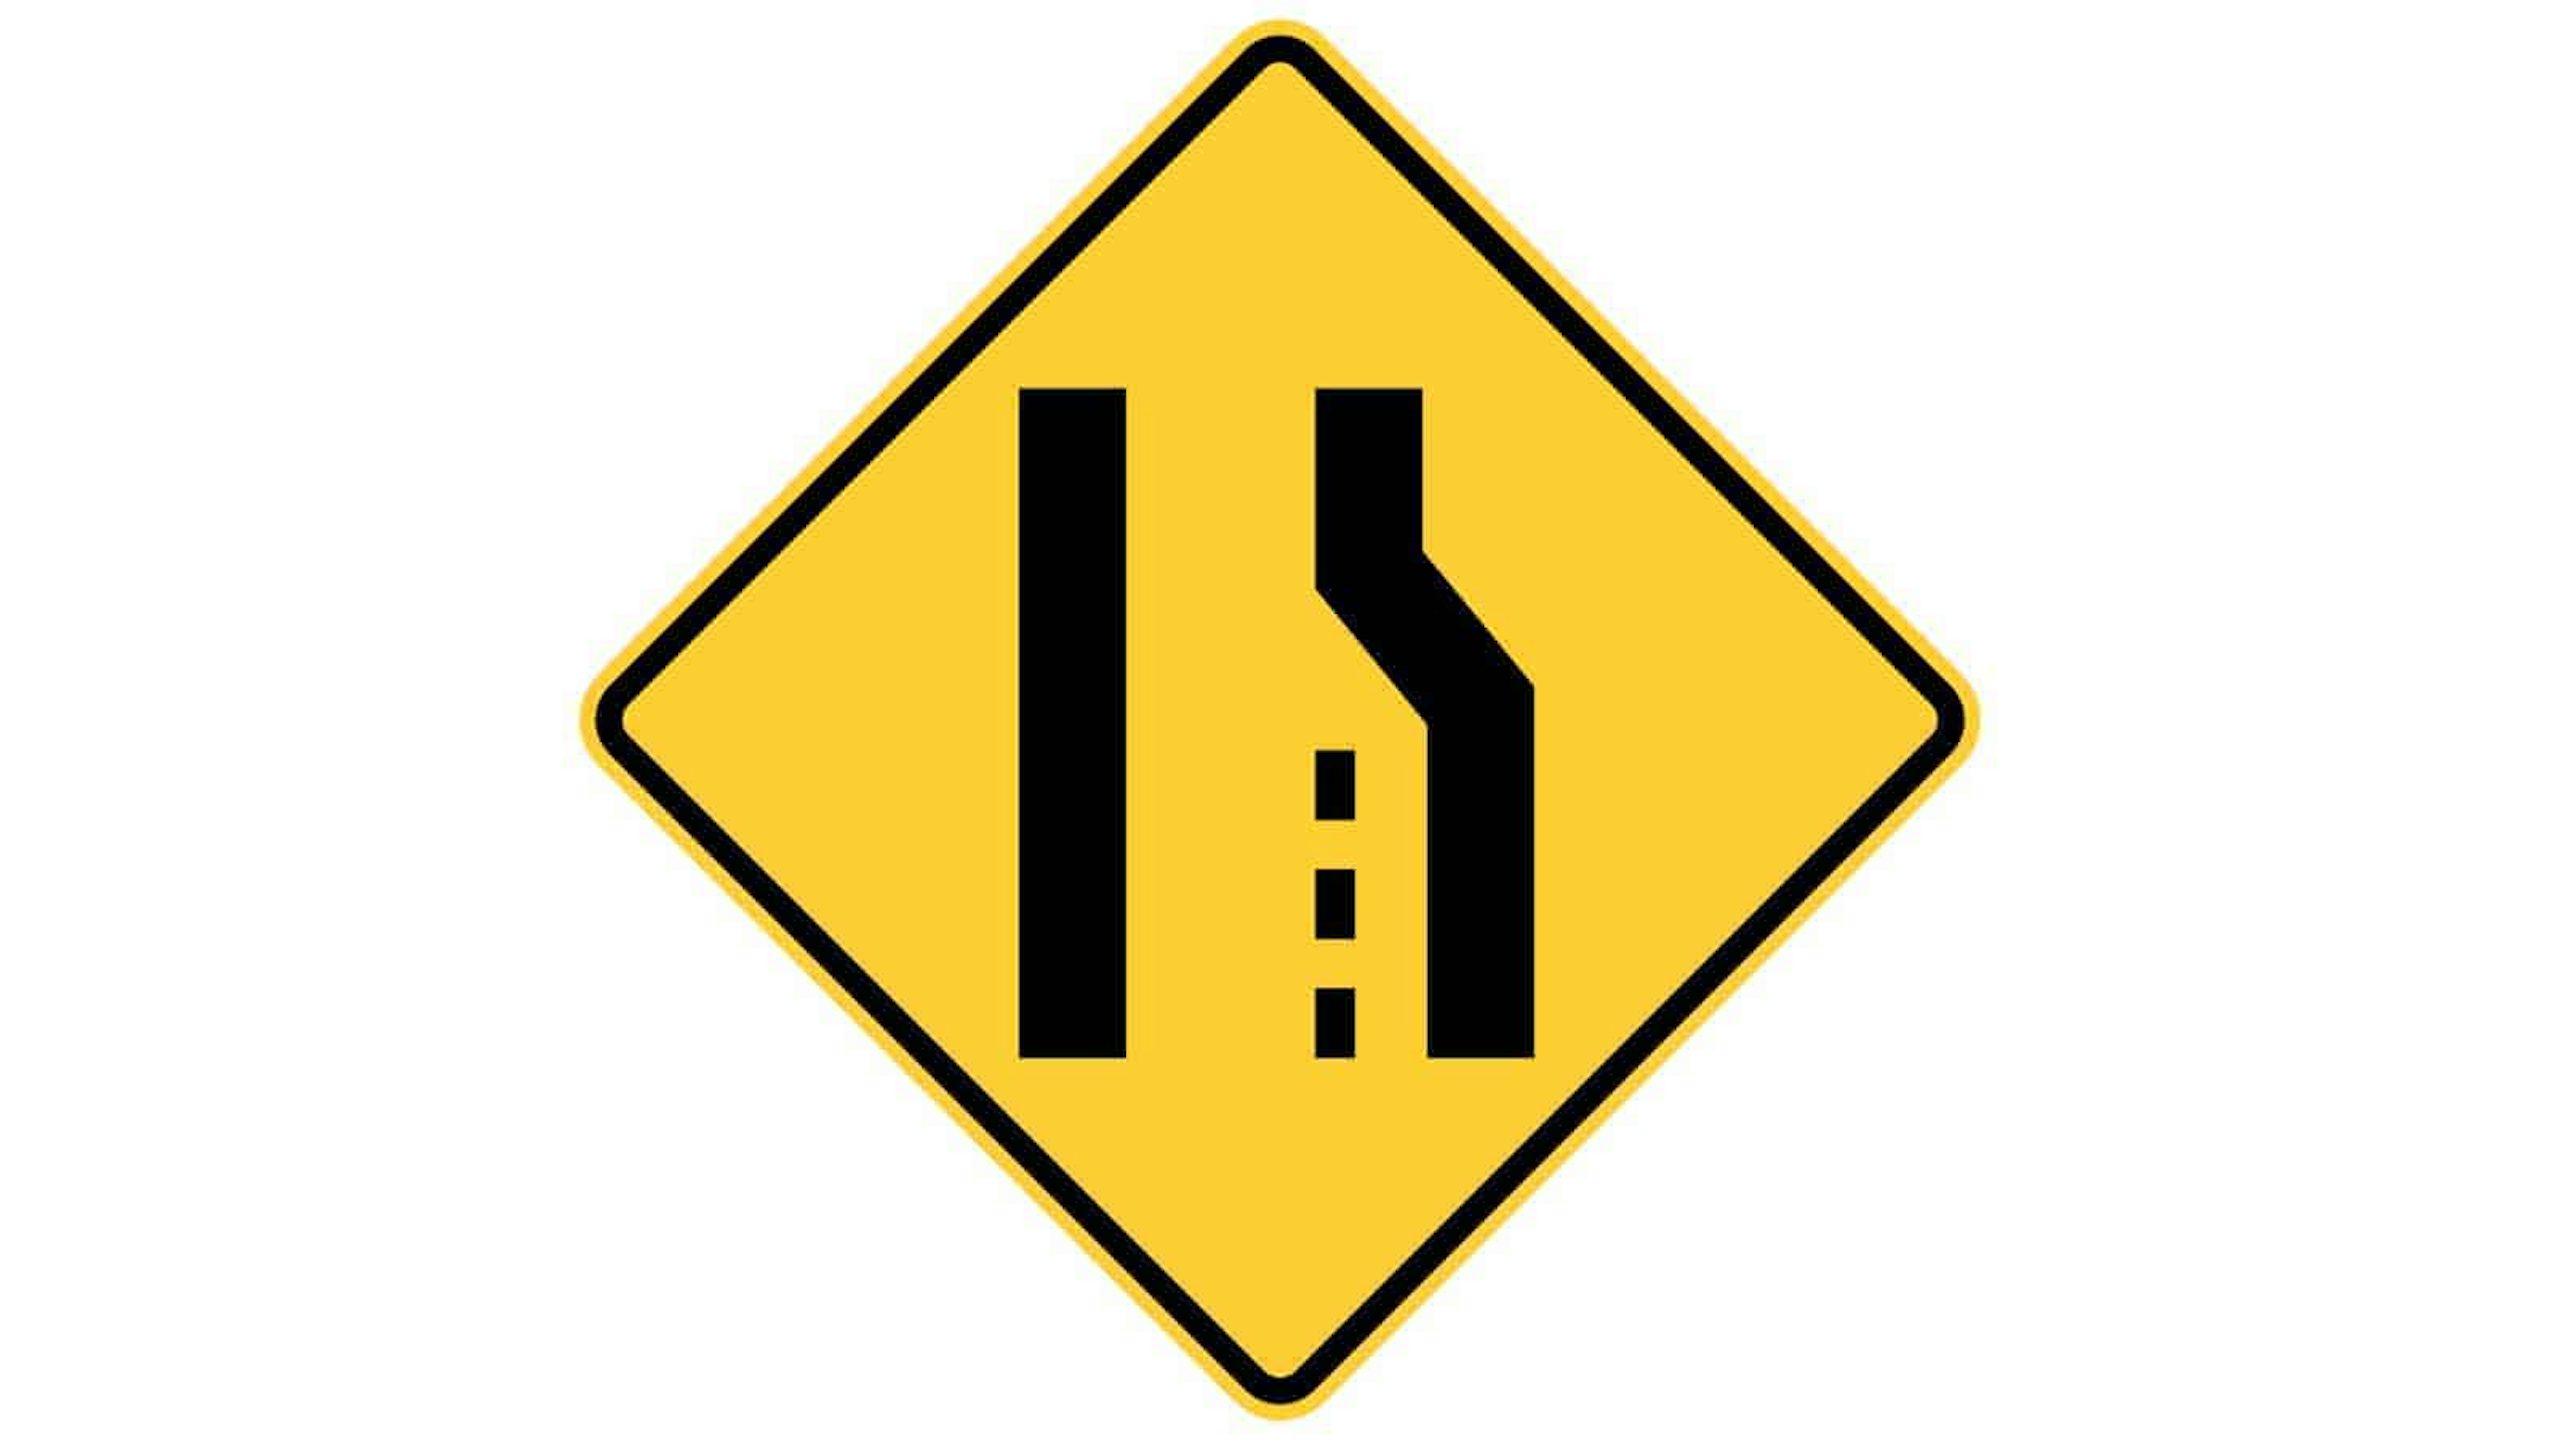 Warning sign right lane ends